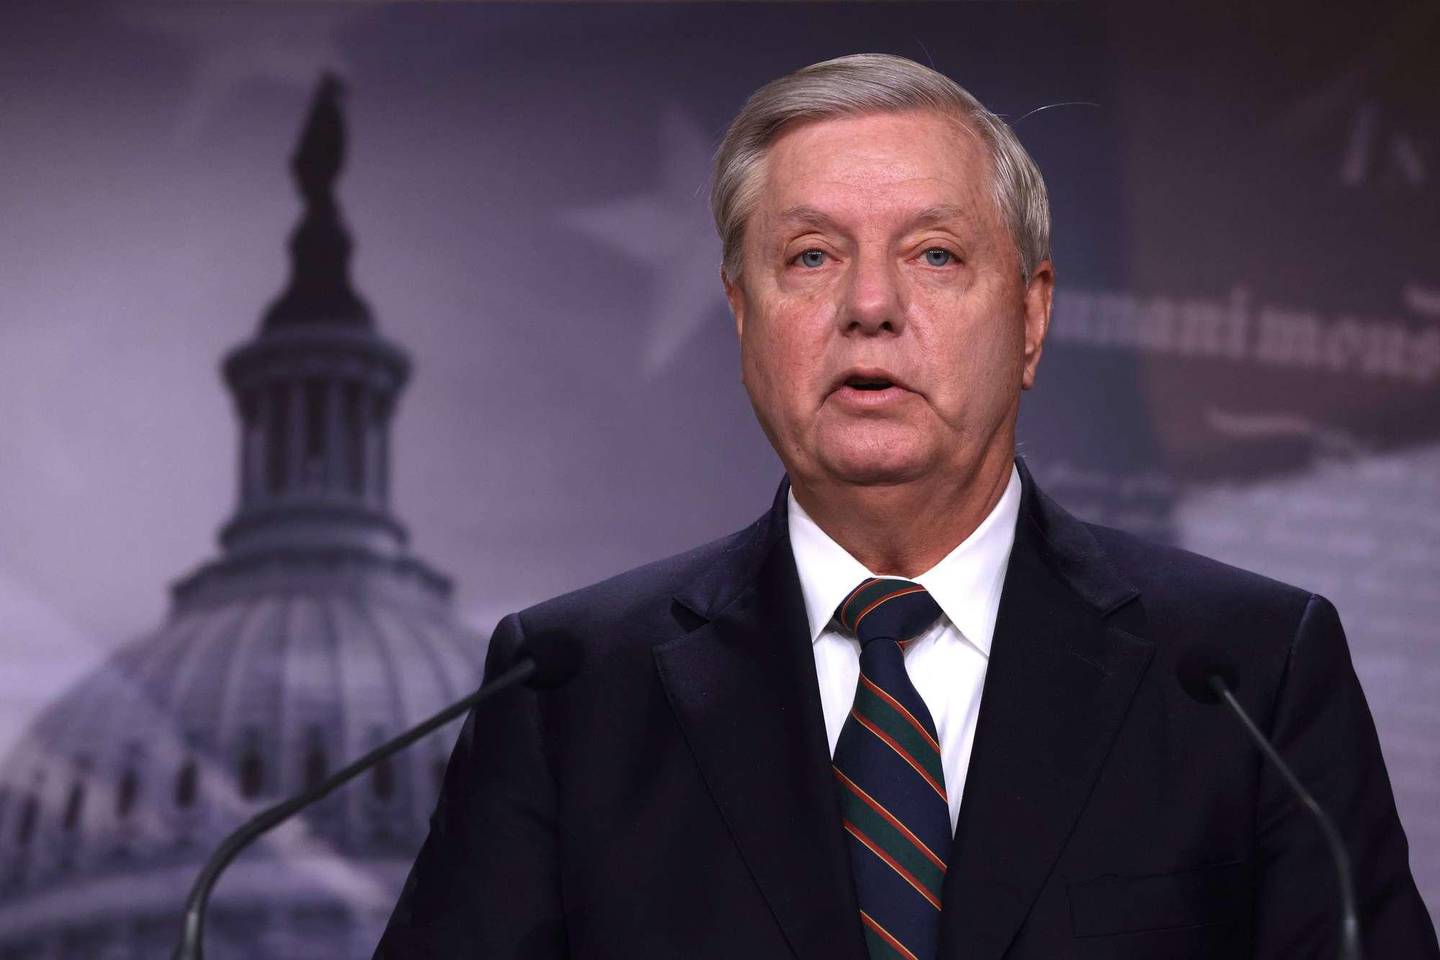 WASHINGTON, DC - JANUARY 07: U.S. Sen. Lindsey Graham (R-SC) speaks during a news conference at the U.S. Capitol January 7, 2021 in Washington, DC. Sen. Graham condemned the pro-Trump mob�s action of storming the Capitol the day before.   Alex Wong/Getty Images/AFP
== FOR NEWSPAPERS, INTERNET, TELCOS & TELEVISION USE ONLY ==